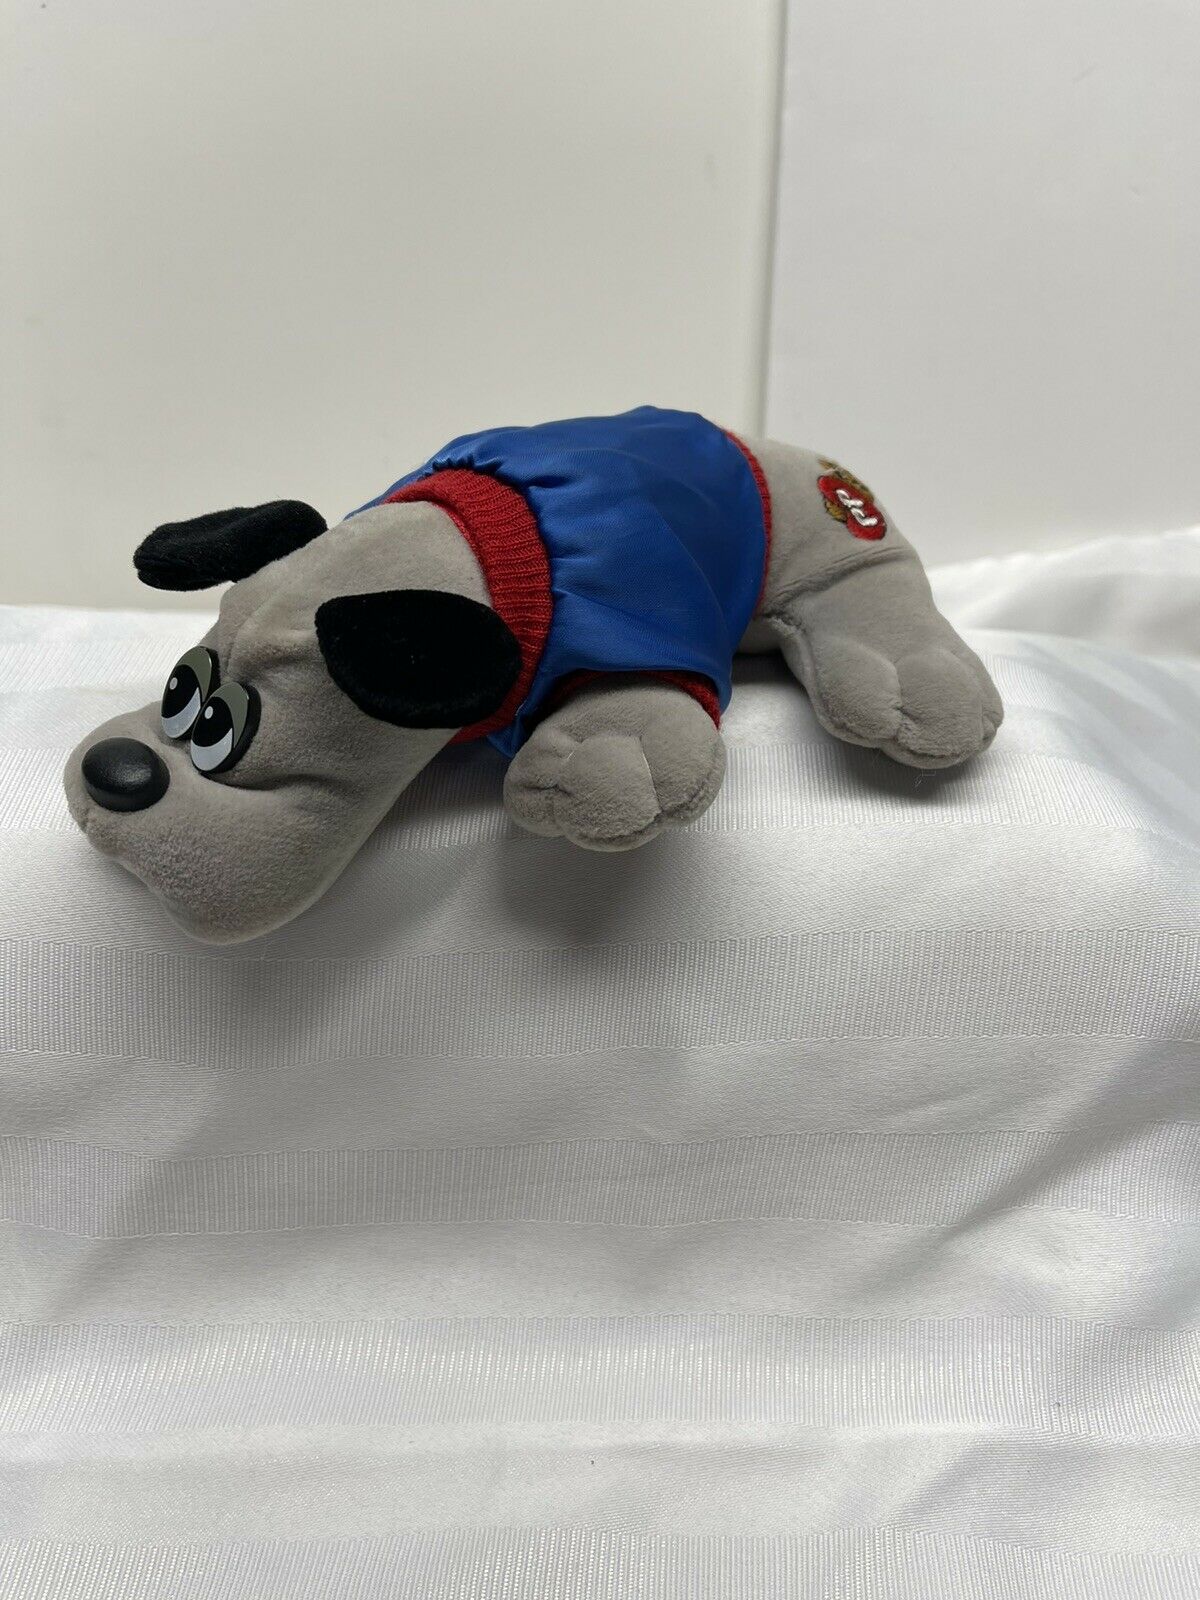 Pound Puppies Grey Puppy Dog Plush With Red Collar And Blue Jacket 8” Vintage